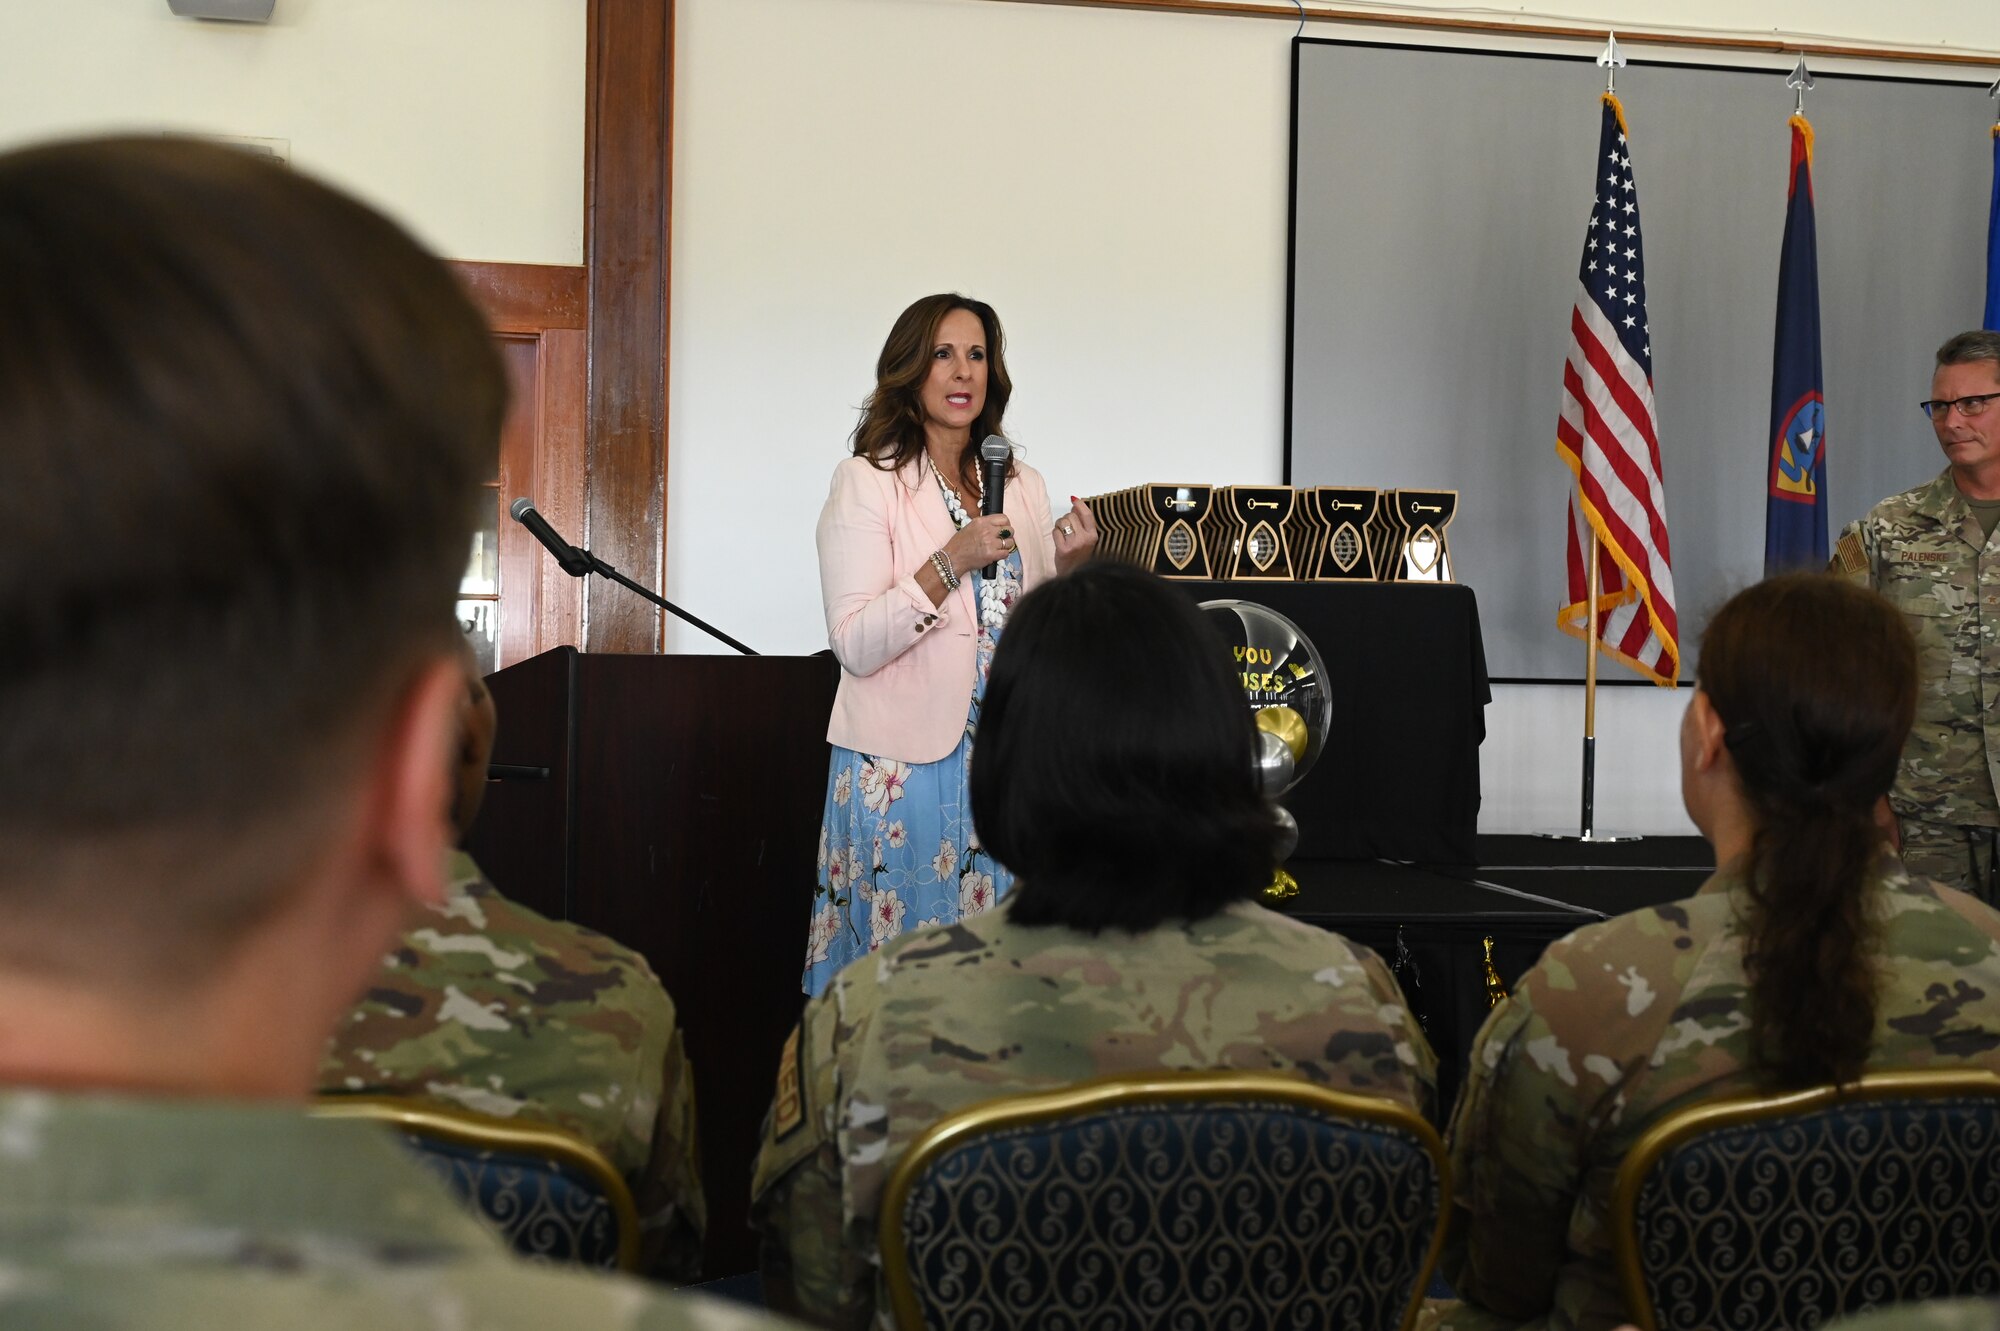 A Key Spouse mentor speaks to the audience about the importance of the Key Spouse program and how it is important to the 36th Wing